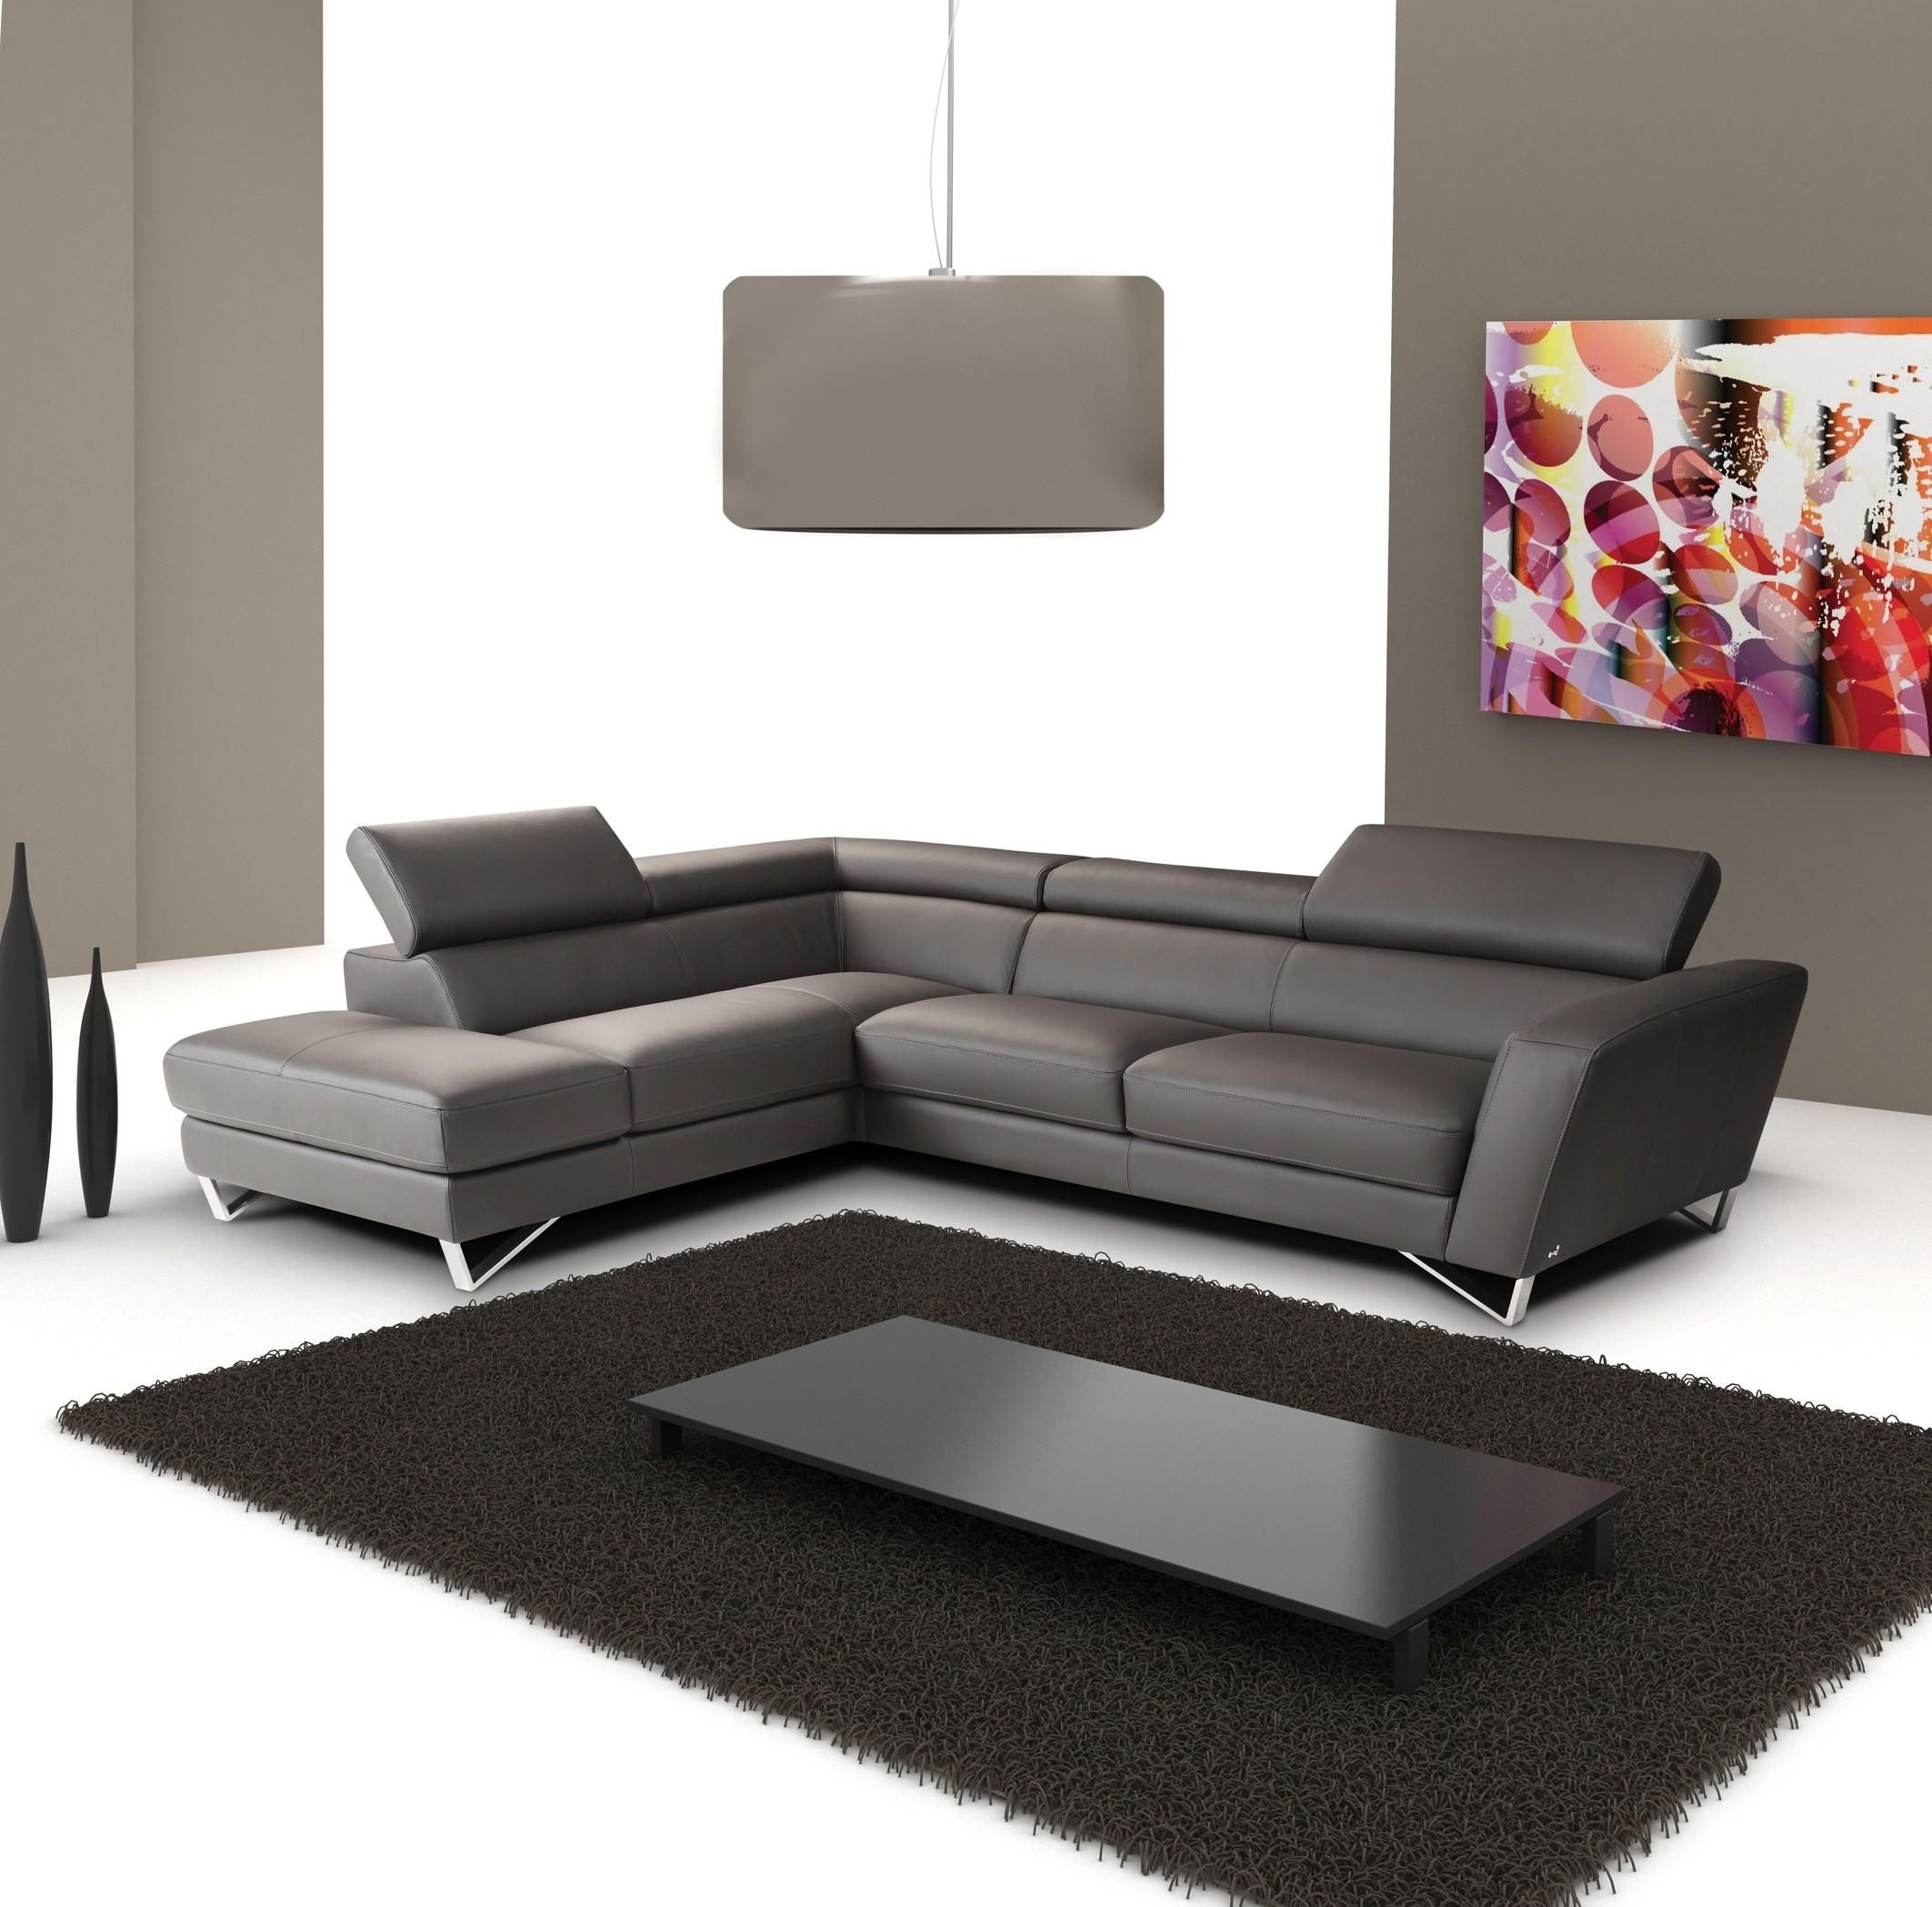 Bedroom : New 2017 Contemporary Living Room Furniture Sets Dark Throughout Contemporary Sofas And Chairs (View 13 of 20)